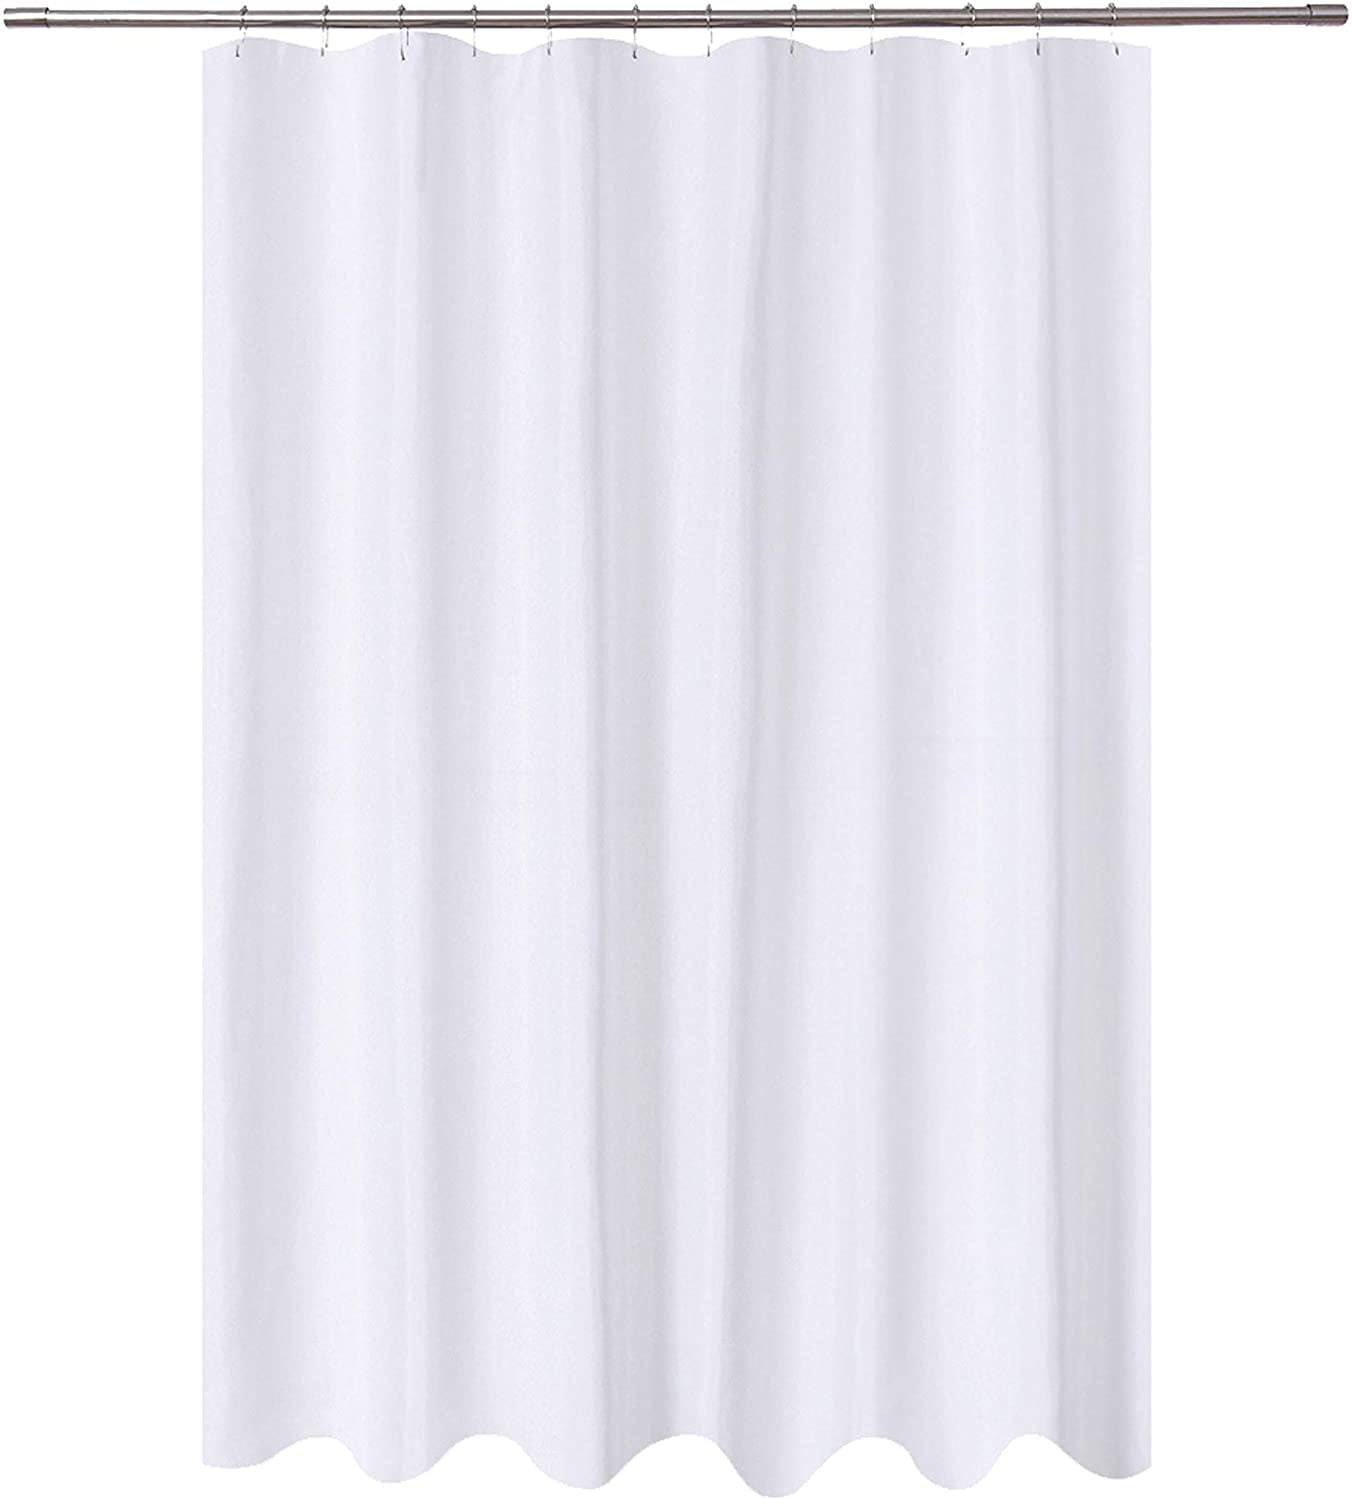 Extra Wide Extra Long Fabric Shower Curtain Liner 108 X 84 Inch Washable White 